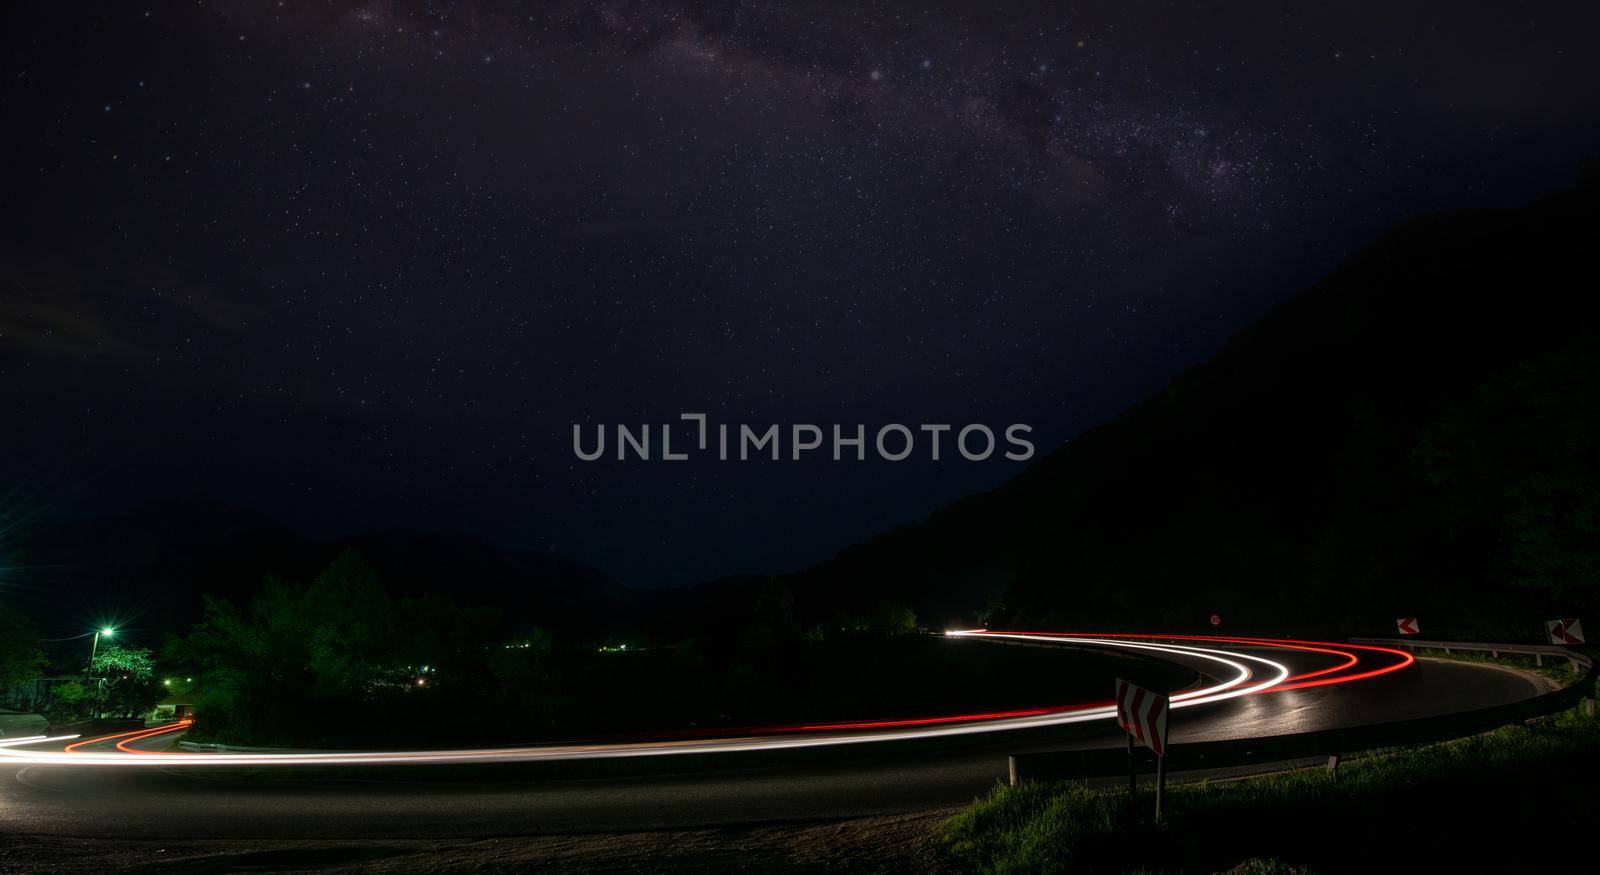 vegicle light trails in night on busy countryroad curve  long exposure